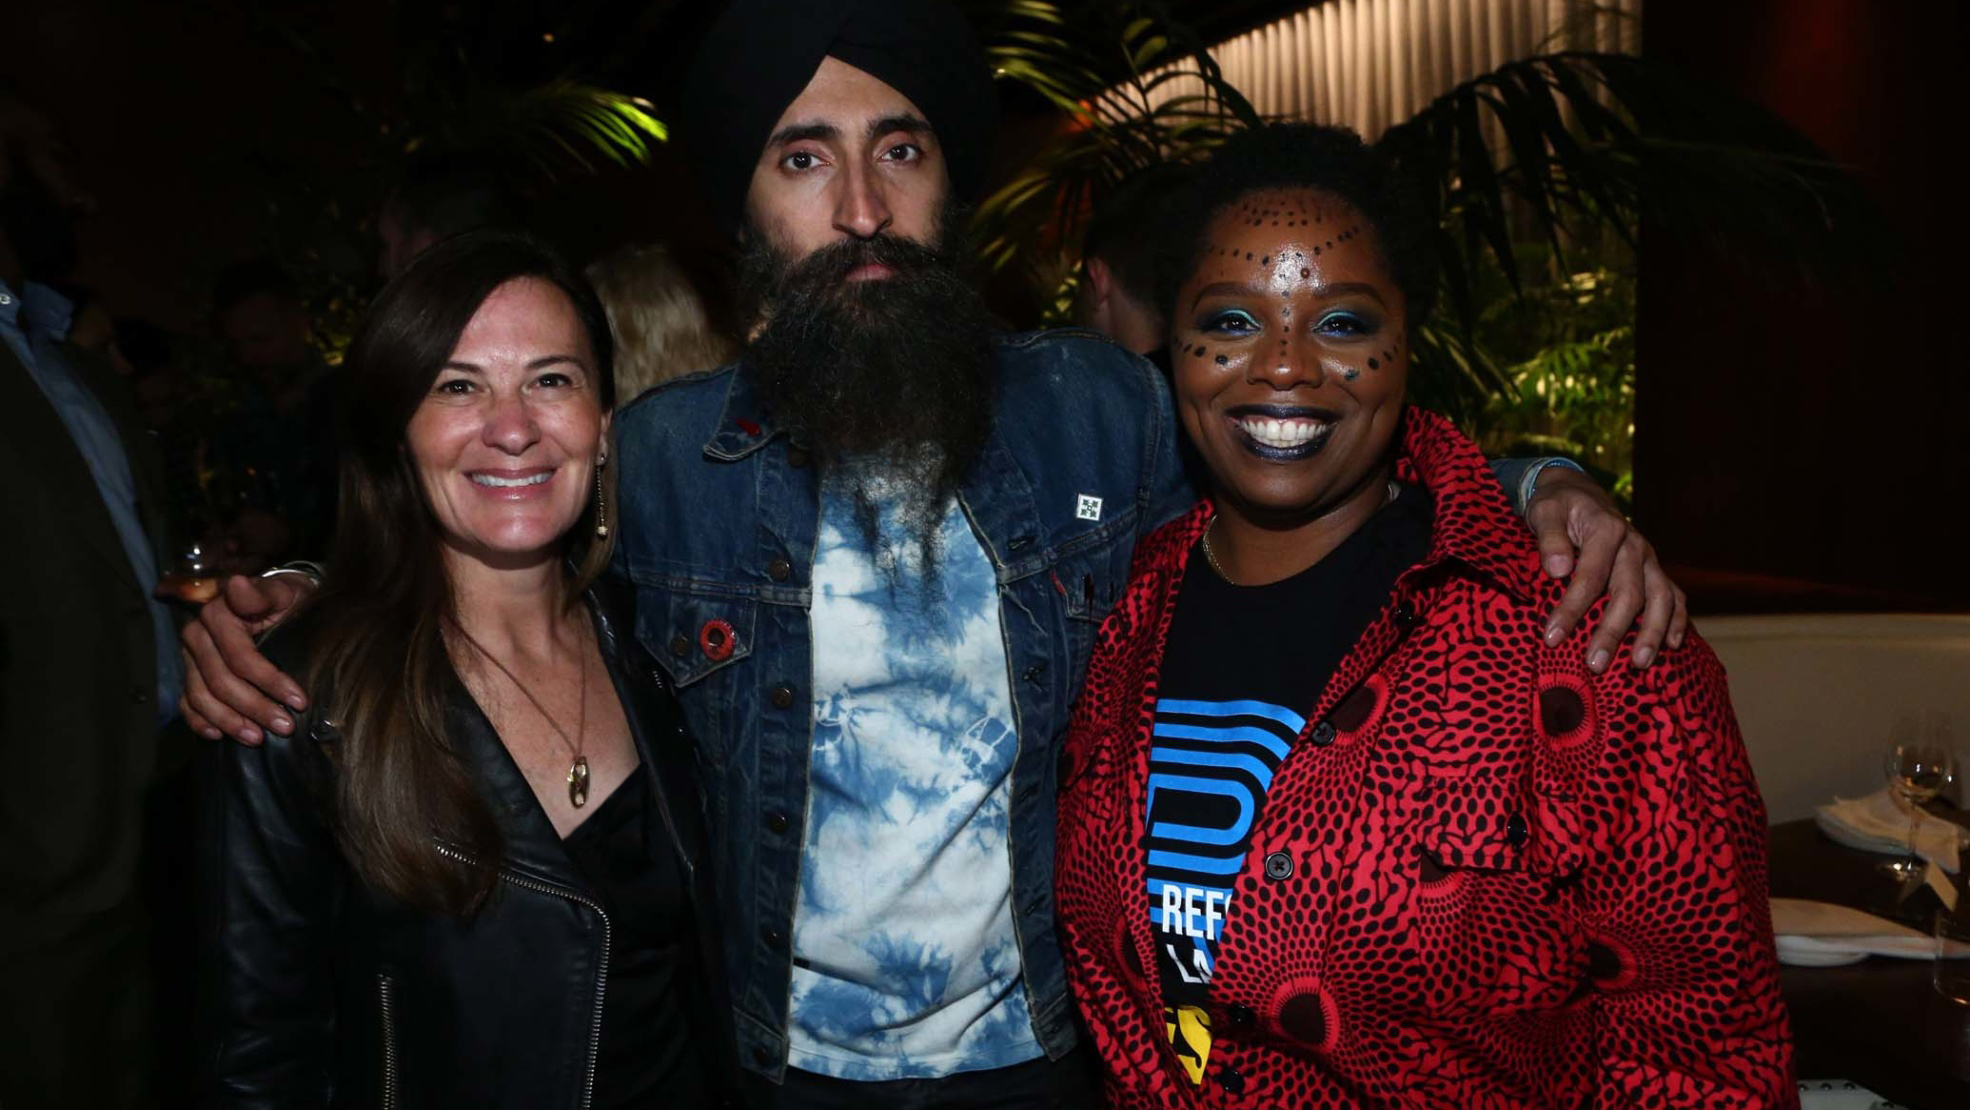 Sarah Harrelson, Waris Ahluwalia and Patrisse Cullors. Photos by Tommaso Boddi of Getty Images. 